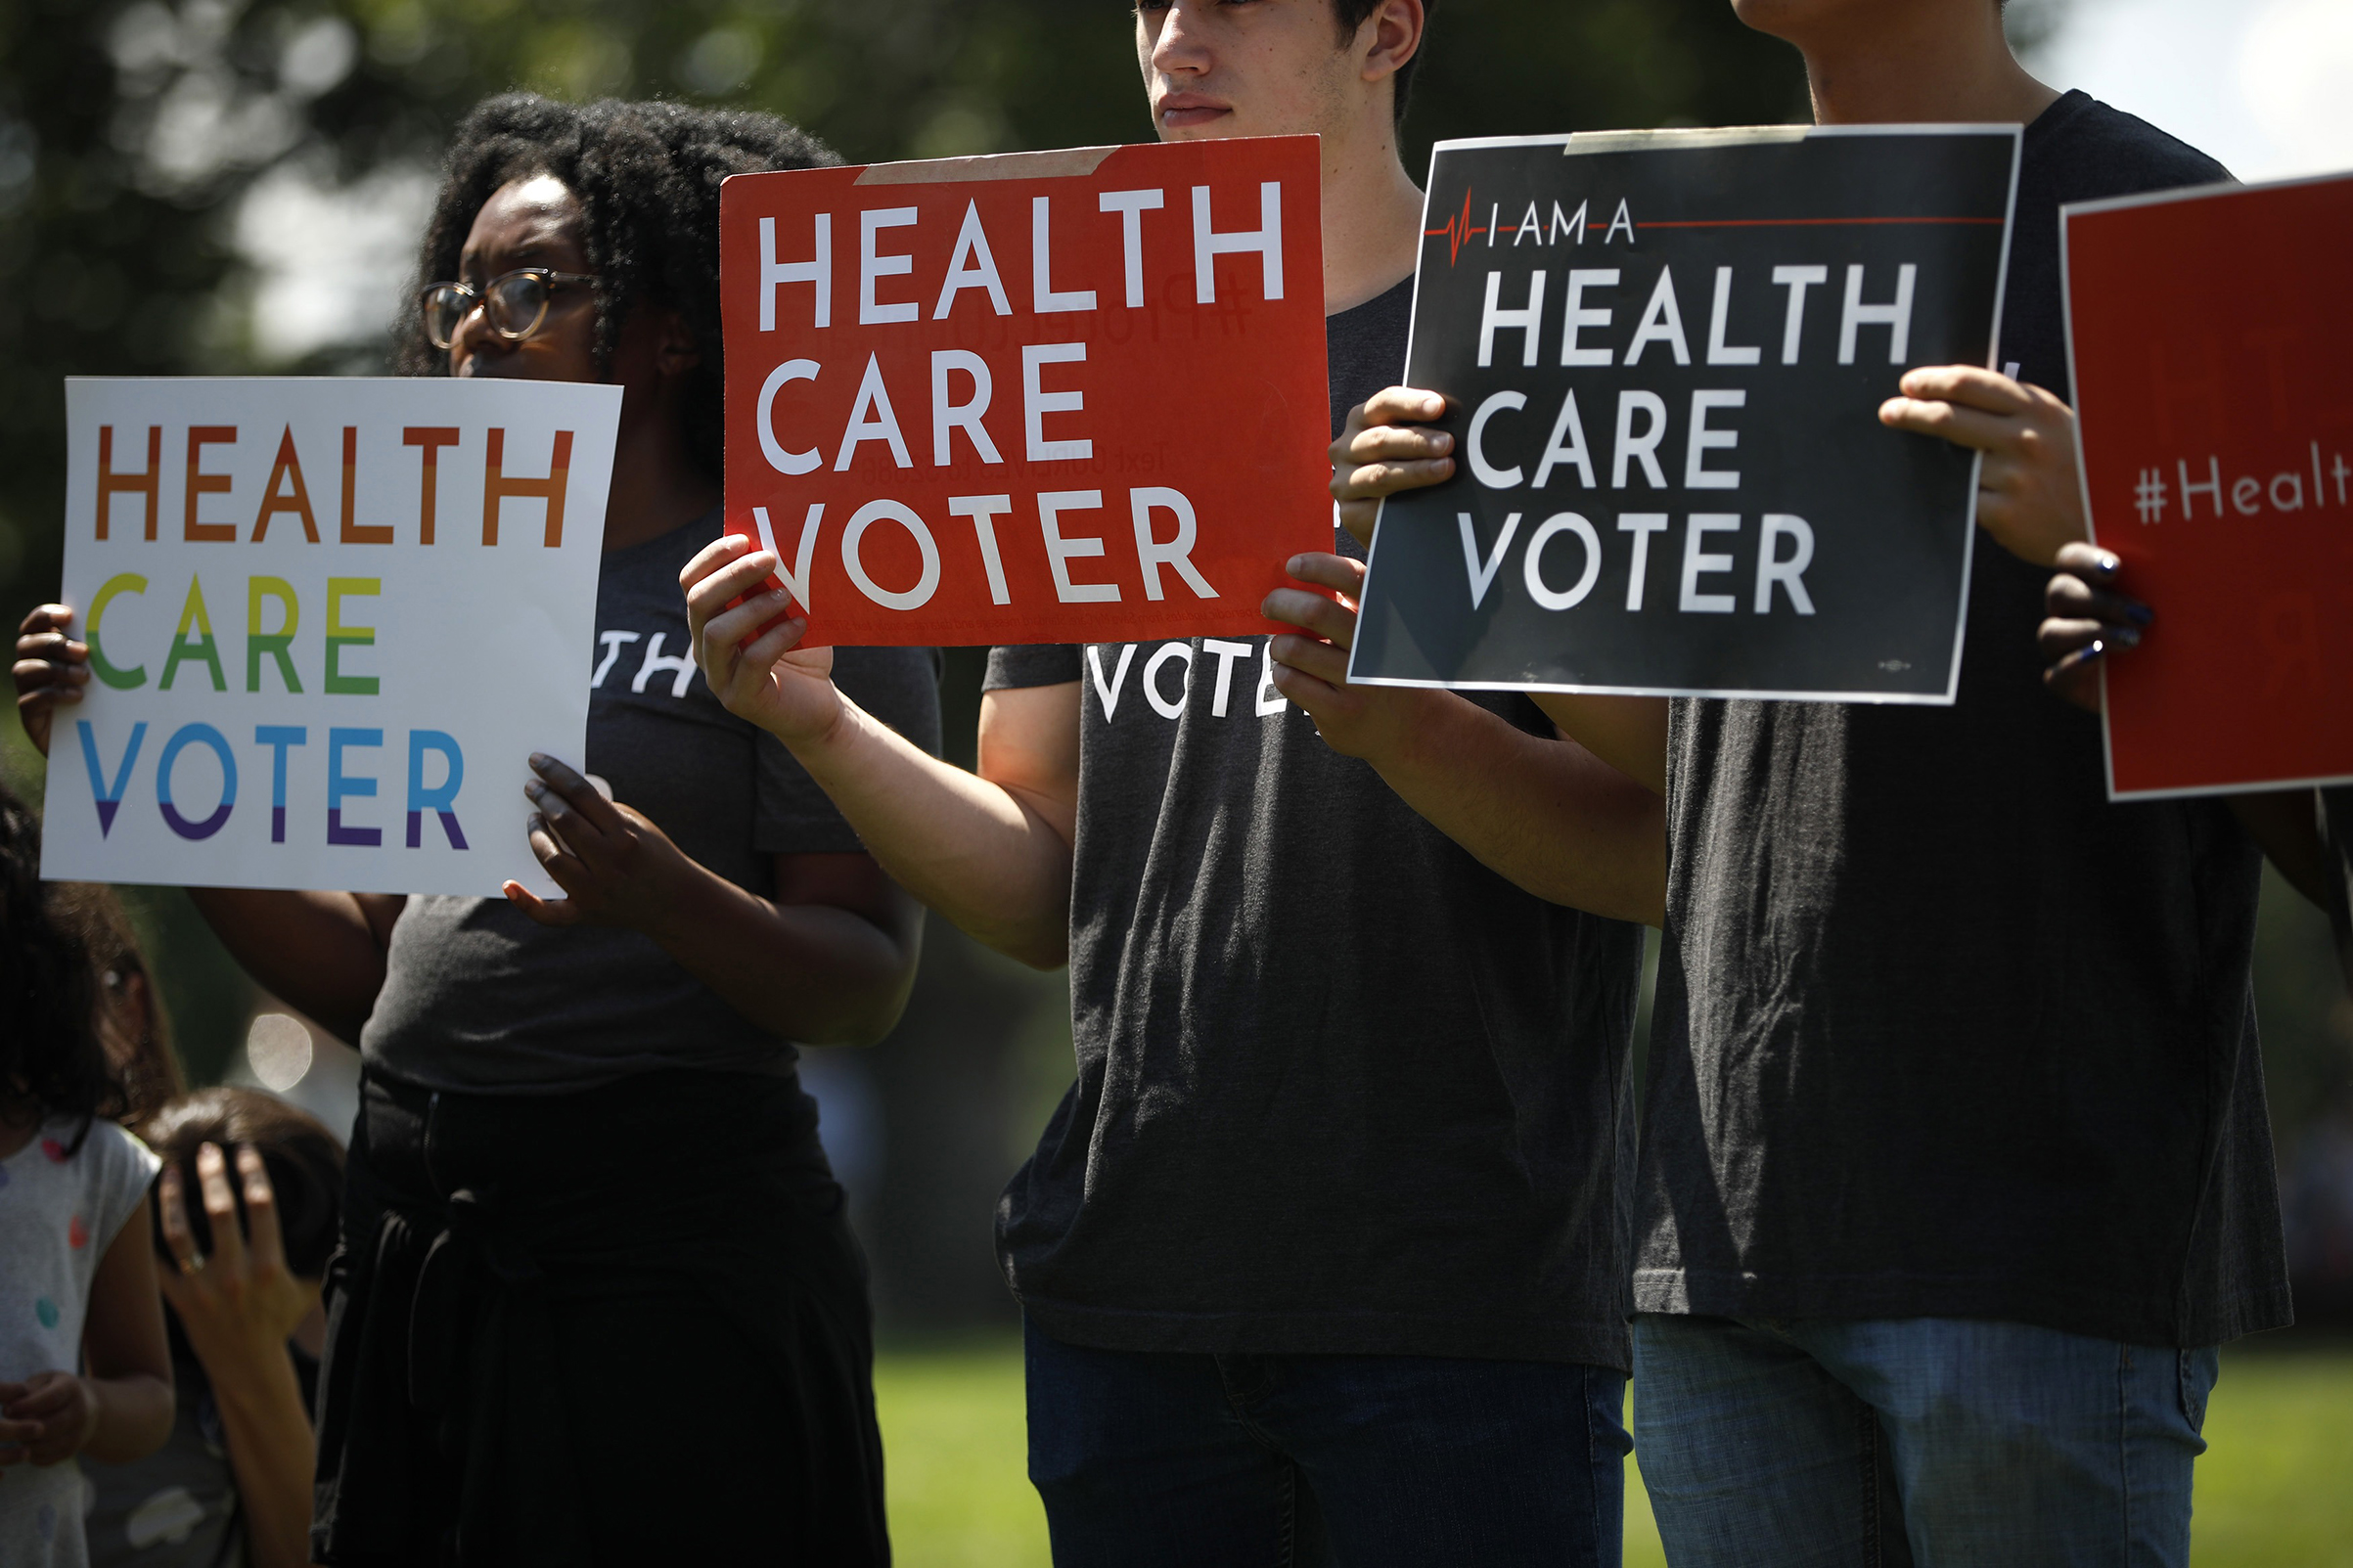 Protesters urged the Trump Administration to protect people with pre-existing conditions on June 26 in Washington, D.C. (Aaron P. Bernstein—Getty Images)